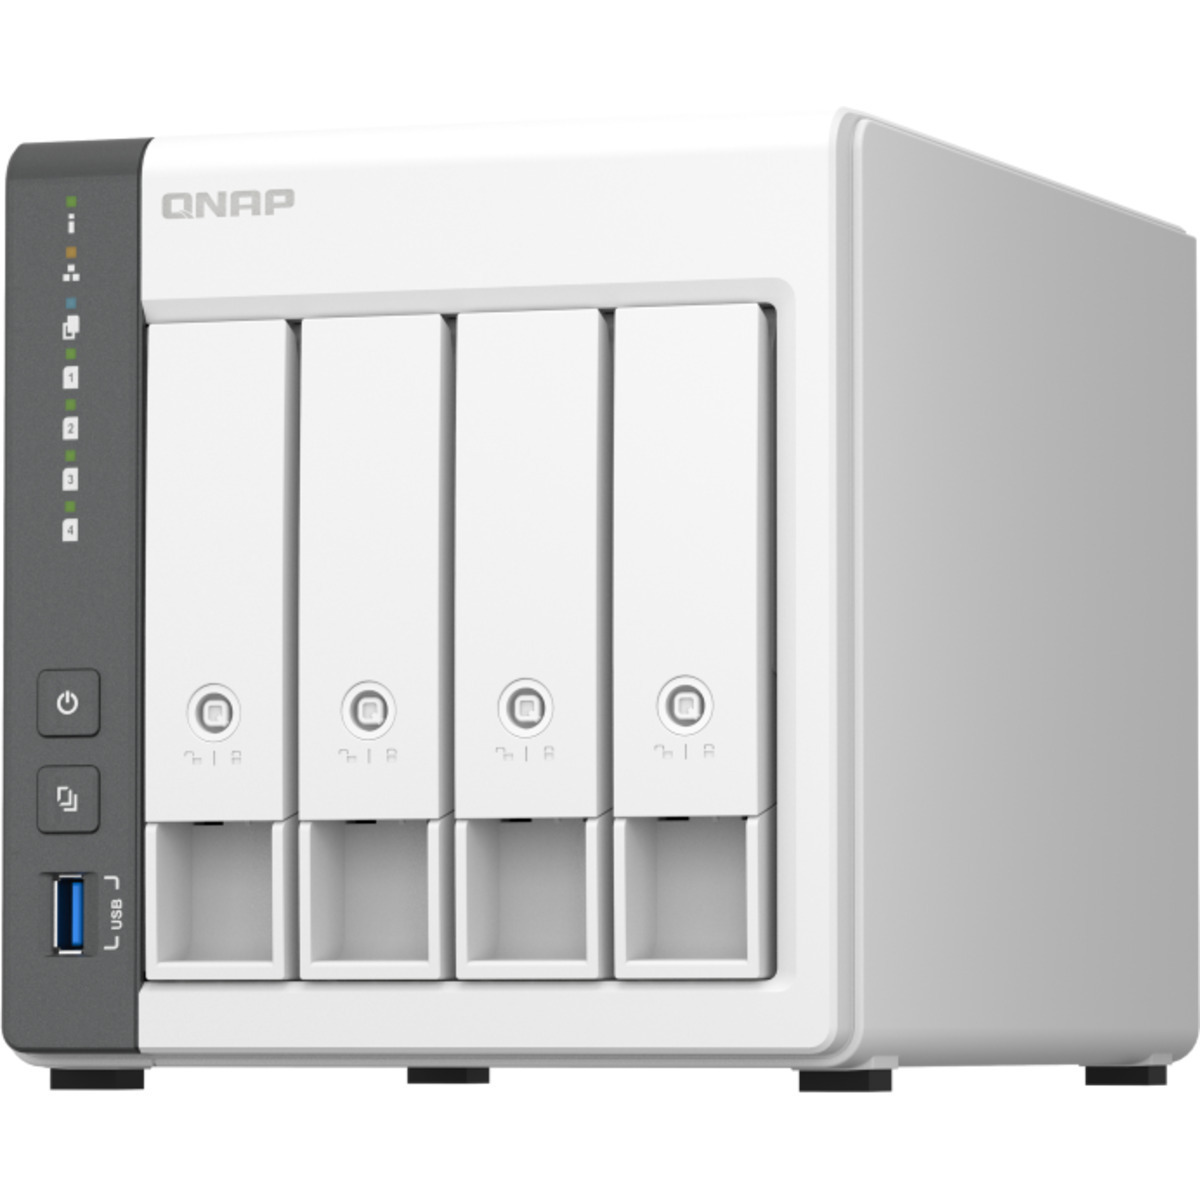 QNAP TS-433 12tb 4-Bay Desktop Personal / Basic Home / Small Office NAS - Network Attached Storage Device 3x4tb Seagate IronWolf Pro ST4000NE001 3.5 7200rpm SATA 6Gb/s HDD NAS Class Drives Installed - Burn-In Tested TS-433